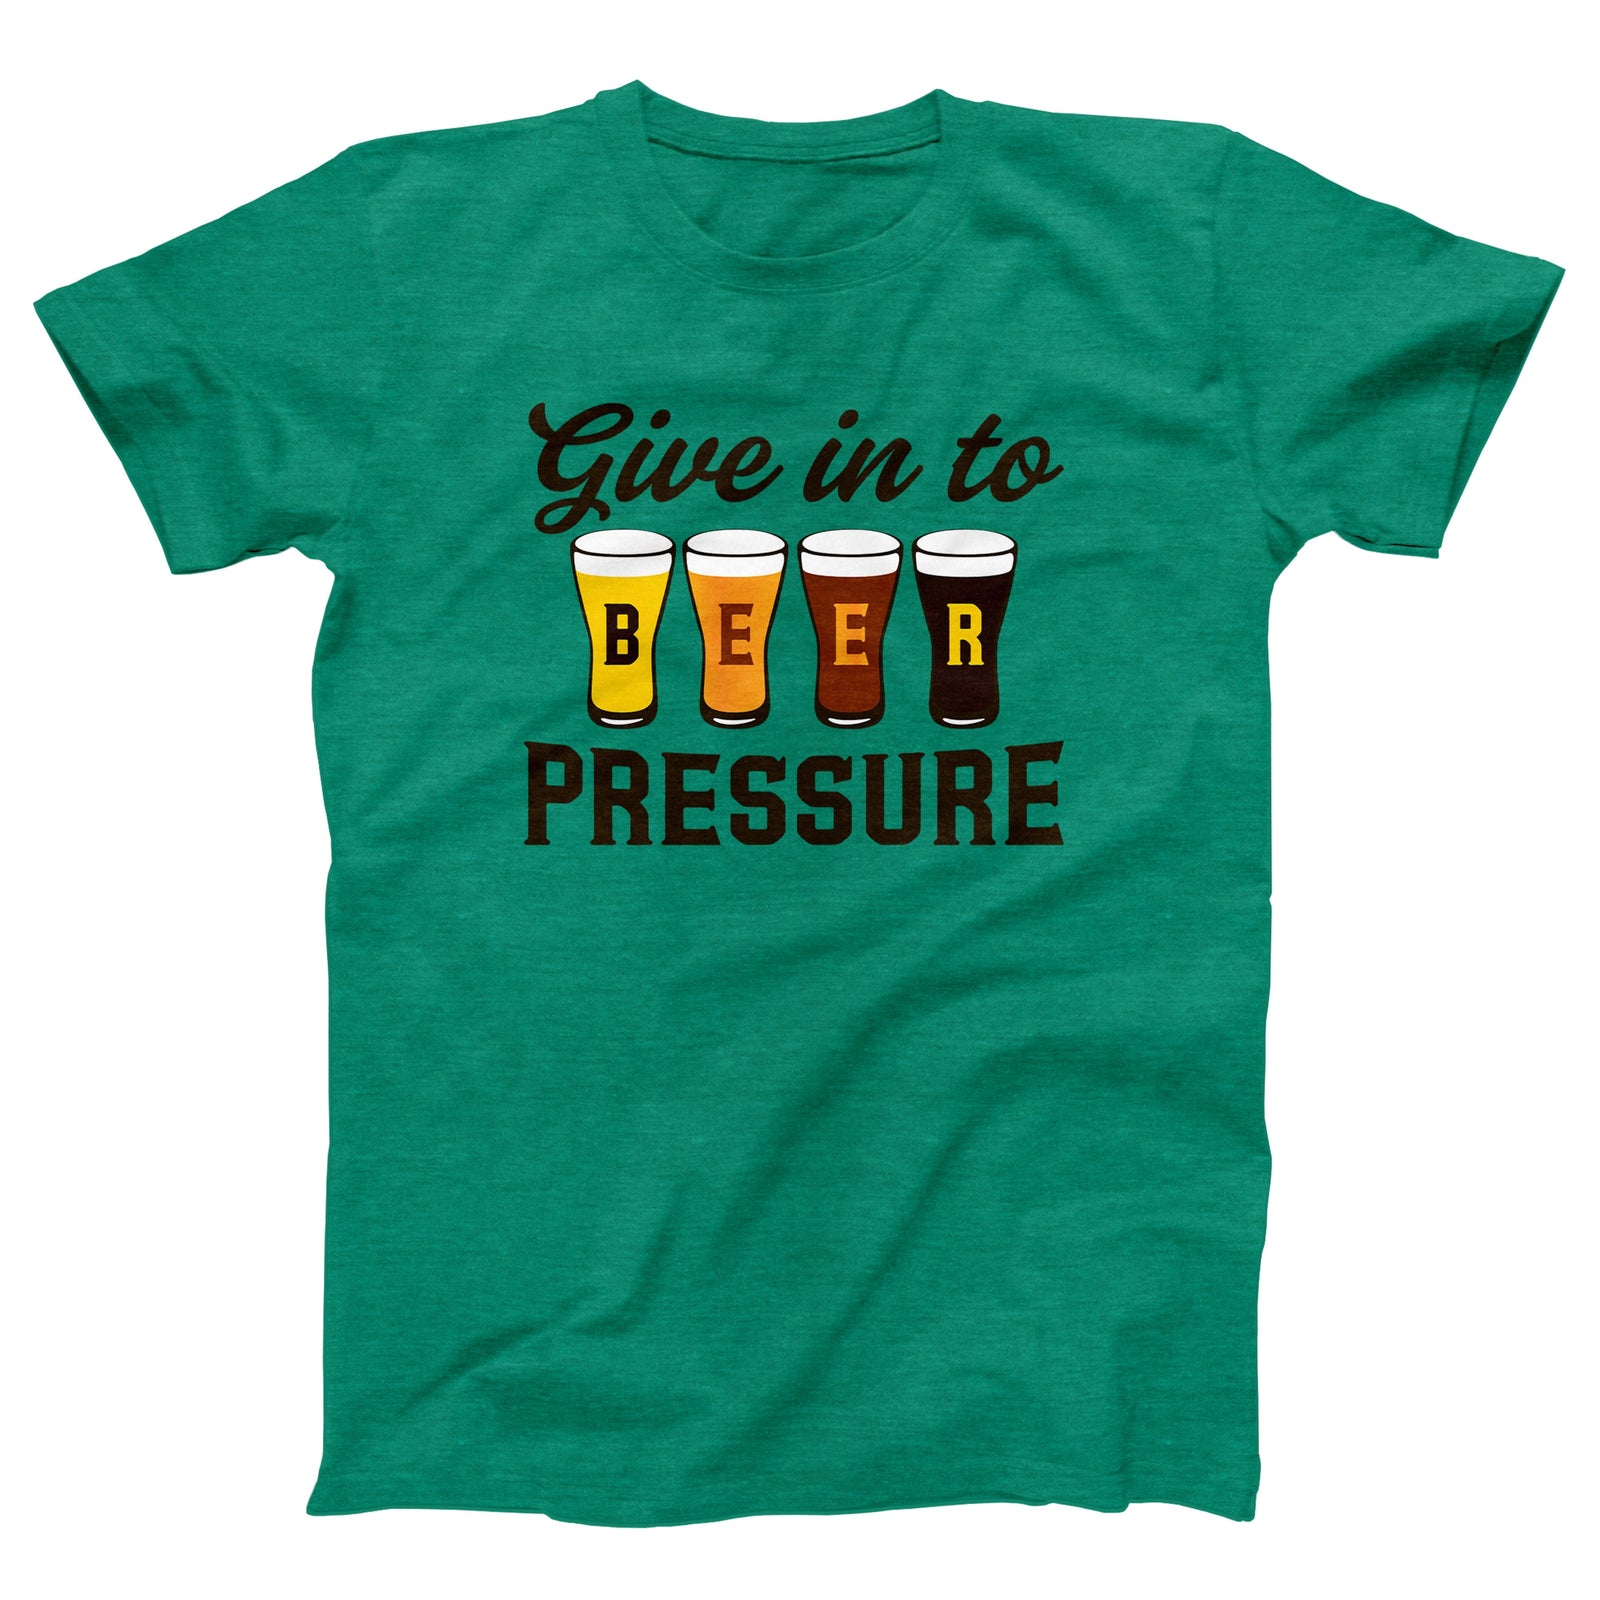 //cdn.shopify.com/s/files/1/0274/2488/2766/products/give-in-to-beer-pressure-menunisex-t-shirt-764104_5000x.jpg?v=1645453799 5000w,
    //cdn.shopify.com/s/files/1/0274/2488/2766/products/give-in-to-beer-pressure-menunisex-t-shirt-764104_4500x.jpg?v=1645453799 4500w,
    //cdn.shopify.com/s/files/1/0274/2488/2766/products/give-in-to-beer-pressure-menunisex-t-shirt-764104_4000x.jpg?v=1645453799 4000w,
    //cdn.shopify.com/s/files/1/0274/2488/2766/products/give-in-to-beer-pressure-menunisex-t-shirt-764104_3500x.jpg?v=1645453799 3500w,
    //cdn.shopify.com/s/files/1/0274/2488/2766/products/give-in-to-beer-pressure-menunisex-t-shirt-764104_3000x.jpg?v=1645453799 3000w,
    //cdn.shopify.com/s/files/1/0274/2488/2766/products/give-in-to-beer-pressure-menunisex-t-shirt-764104_2500x.jpg?v=1645453799 2500w,
    //cdn.shopify.com/s/files/1/0274/2488/2766/products/give-in-to-beer-pressure-menunisex-t-shirt-764104_2000x.jpg?v=1645453799 2000w,
    //cdn.shopify.com/s/files/1/0274/2488/2766/products/give-in-to-beer-pressure-menunisex-t-shirt-764104_1800x.jpg?v=1645453799 1800w,
    //cdn.shopify.com/s/files/1/0274/2488/2766/products/give-in-to-beer-pressure-menunisex-t-shirt-764104_1600x.jpg?v=1645453799 1600w,
    //cdn.shopify.com/s/files/1/0274/2488/2766/products/give-in-to-beer-pressure-menunisex-t-shirt-764104_1400x.jpg?v=1645453799 1400w,
    //cdn.shopify.com/s/files/1/0274/2488/2766/products/give-in-to-beer-pressure-menunisex-t-shirt-764104_1200x.jpg?v=1645453799 1200w,
    //cdn.shopify.com/s/files/1/0274/2488/2766/products/give-in-to-beer-pressure-menunisex-t-shirt-764104_1000x.jpg?v=1645453799 1000w,
    //cdn.shopify.com/s/files/1/0274/2488/2766/products/give-in-to-beer-pressure-menunisex-t-shirt-764104_800x.jpg?v=1645453799 800w,
    //cdn.shopify.com/s/files/1/0274/2488/2766/products/give-in-to-beer-pressure-menunisex-t-shirt-764104_600x.jpg?v=1645453799 600w,
    //cdn.shopify.com/s/files/1/0274/2488/2766/products/give-in-to-beer-pressure-menunisex-t-shirt-764104_400x.jpg?v=1645453799 400w,
    //cdn.shopify.com/s/files/1/0274/2488/2766/products/give-in-to-beer-pressure-menunisex-t-shirt-764104_200x.jpg?v=1645453799 200w